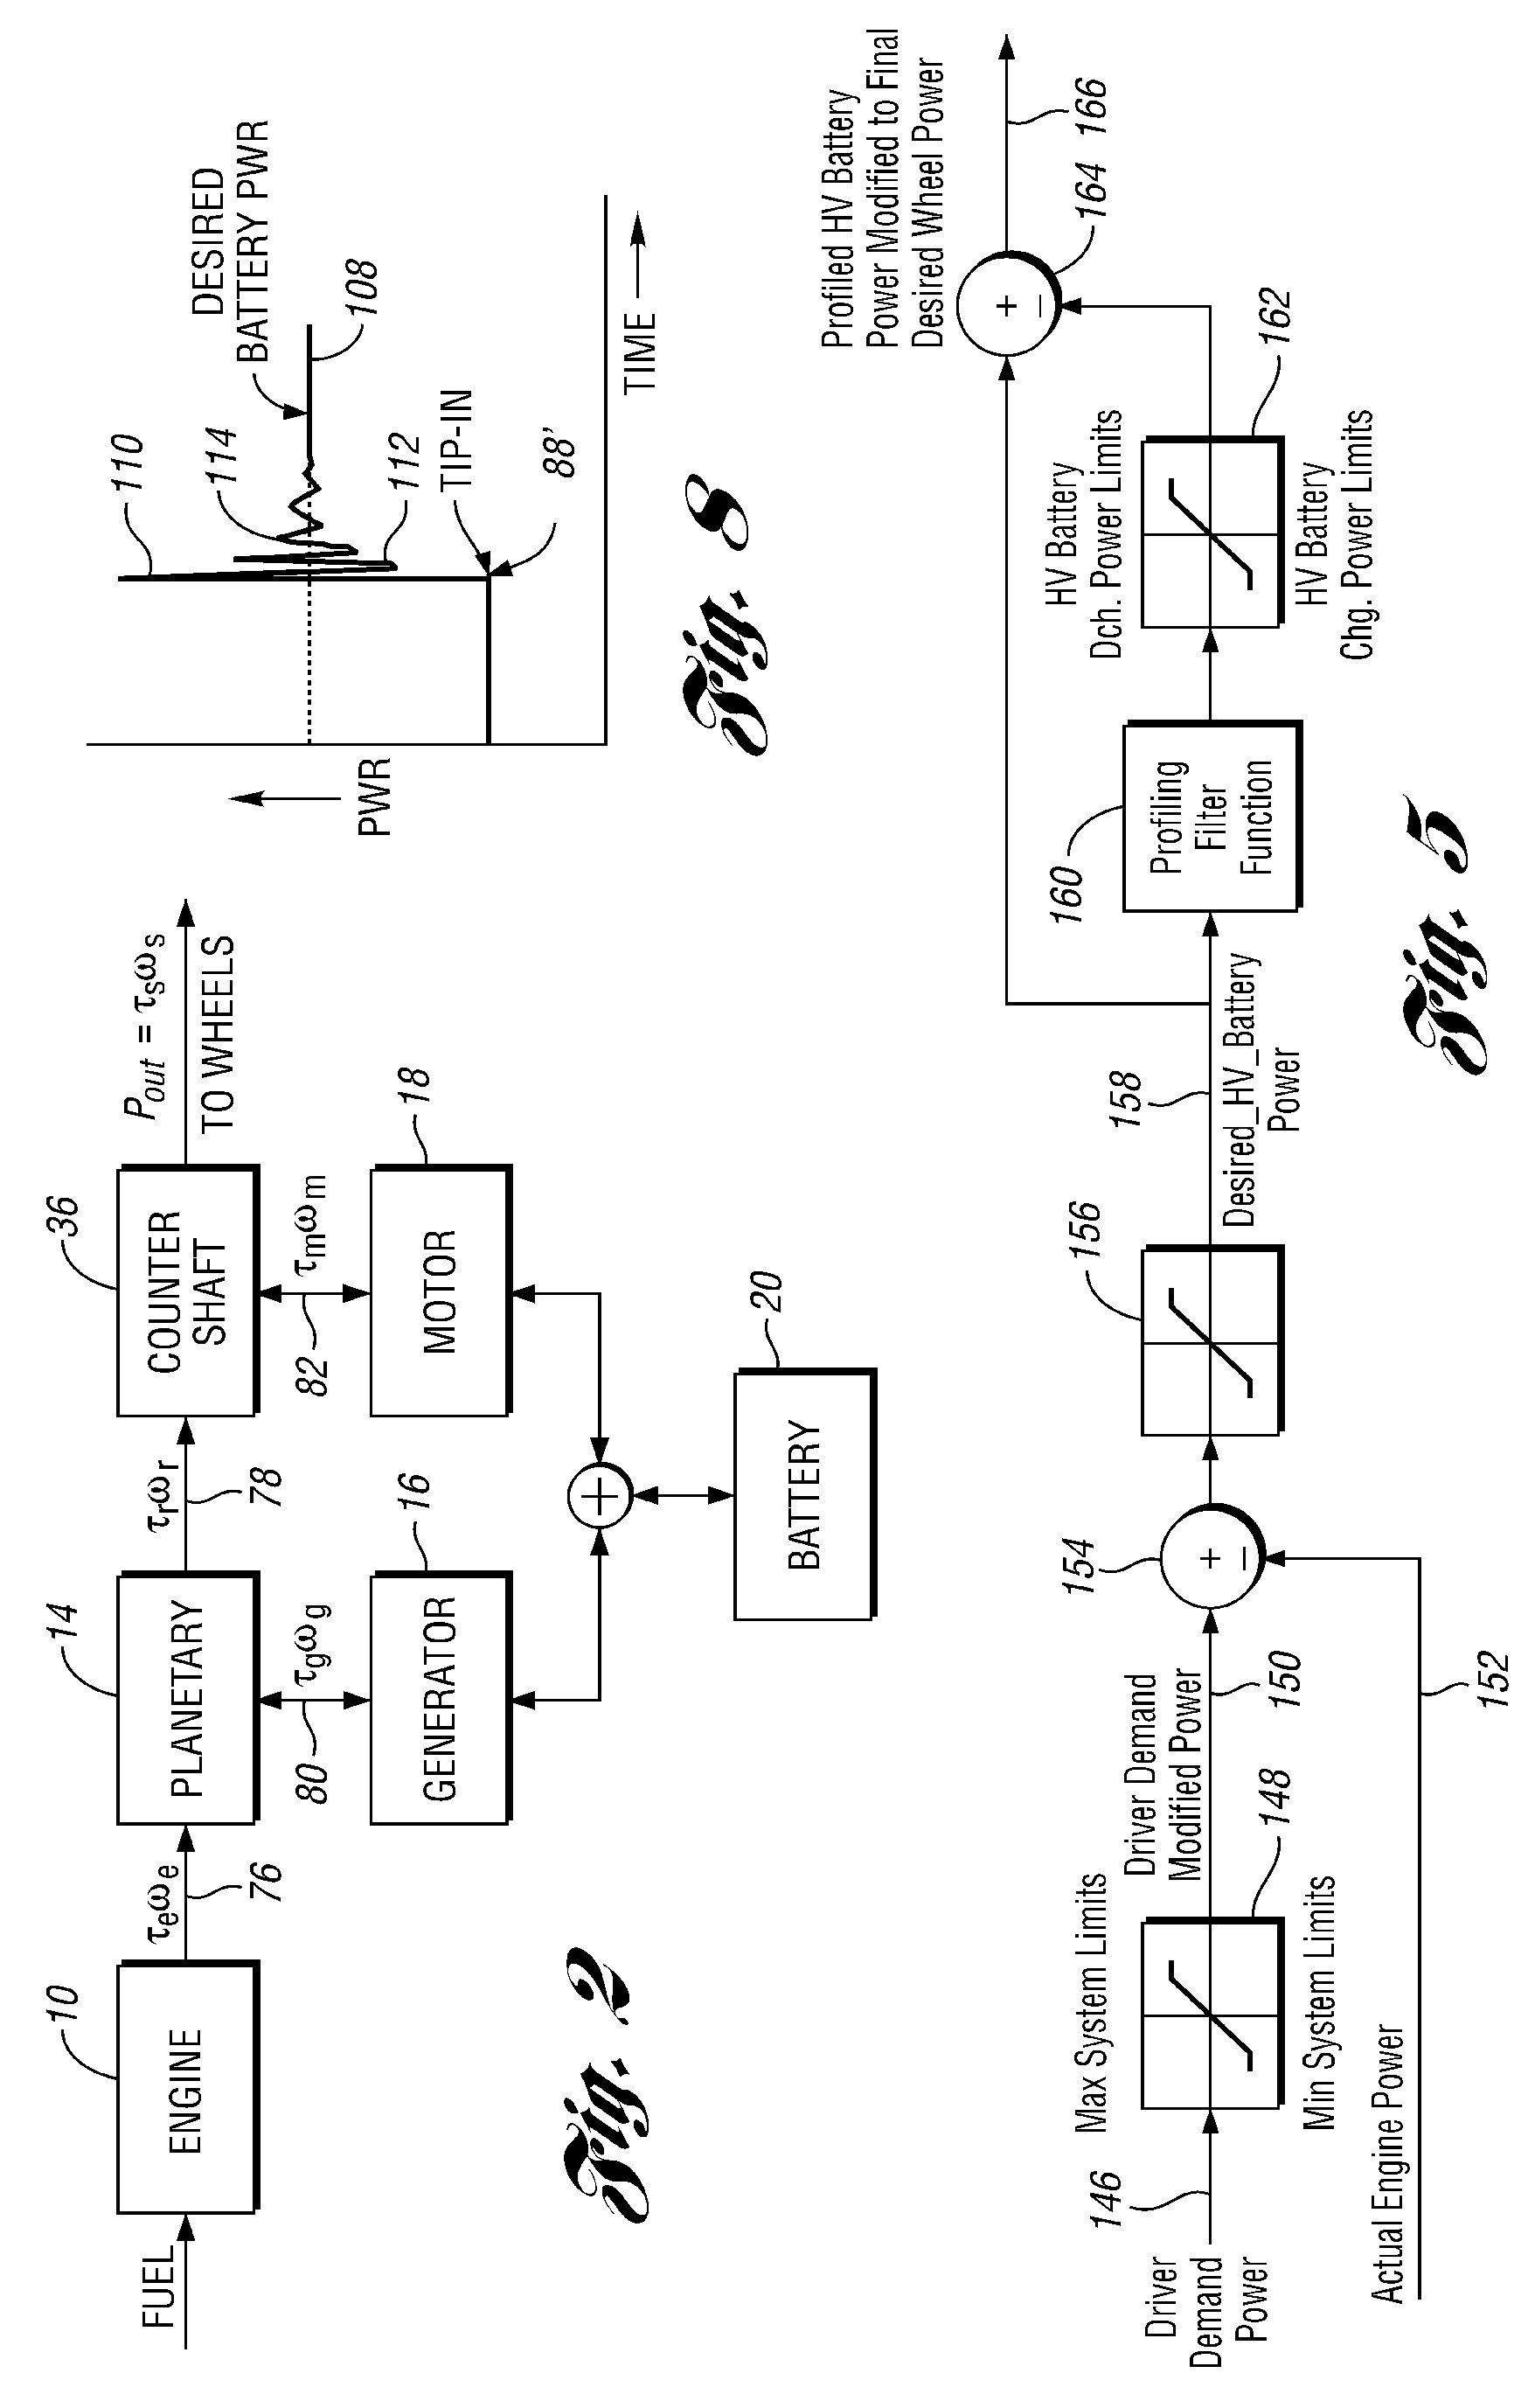 Method and system for determining final desired wheel power in a hybrid electric vehicle powertrain